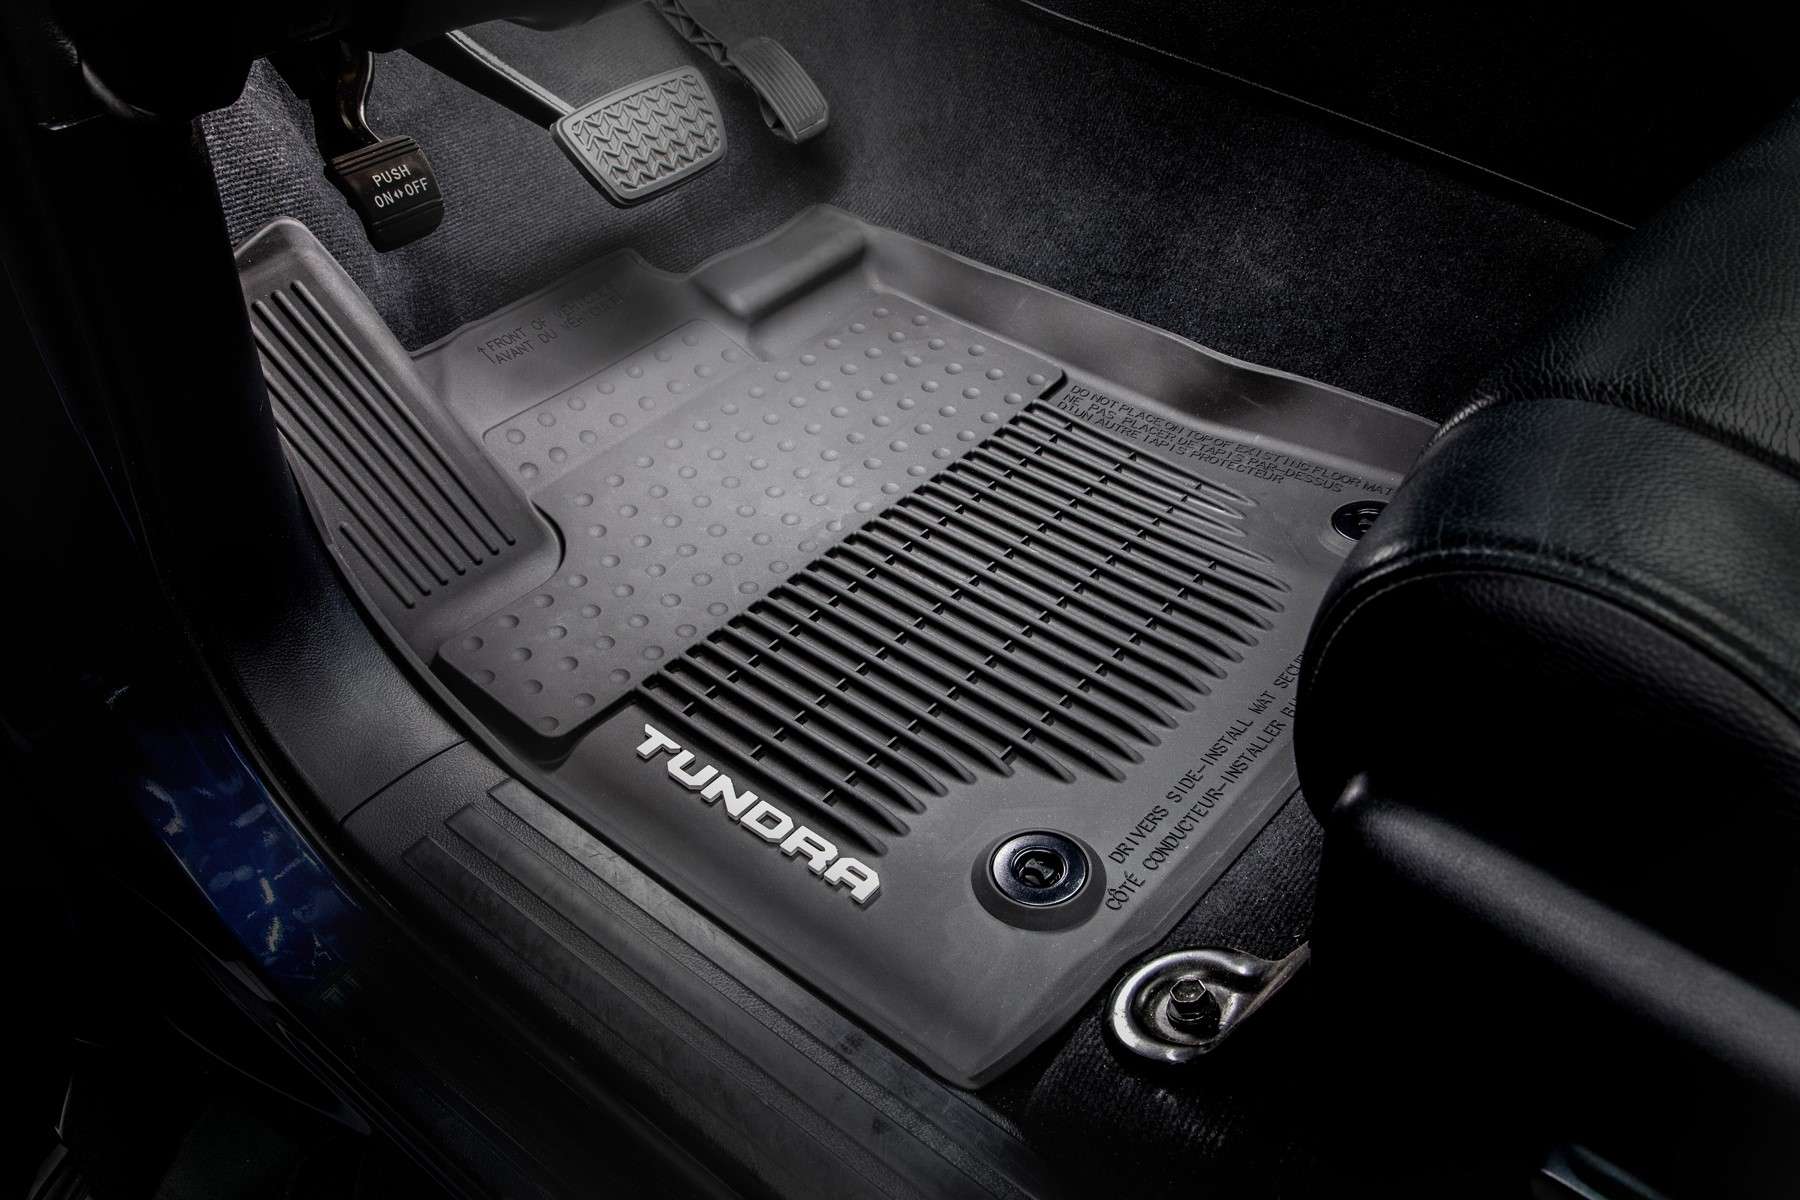 Your Tundra has never been afraid of a little dirt. And now you can really go all out while still keeping the interior like new. Contain the mess with the Genuine Toyota All-Weather Floor Liners; theyâre precisely engineered to fit your footwell so your carpet stays protected, no matter whatâs on your boots.